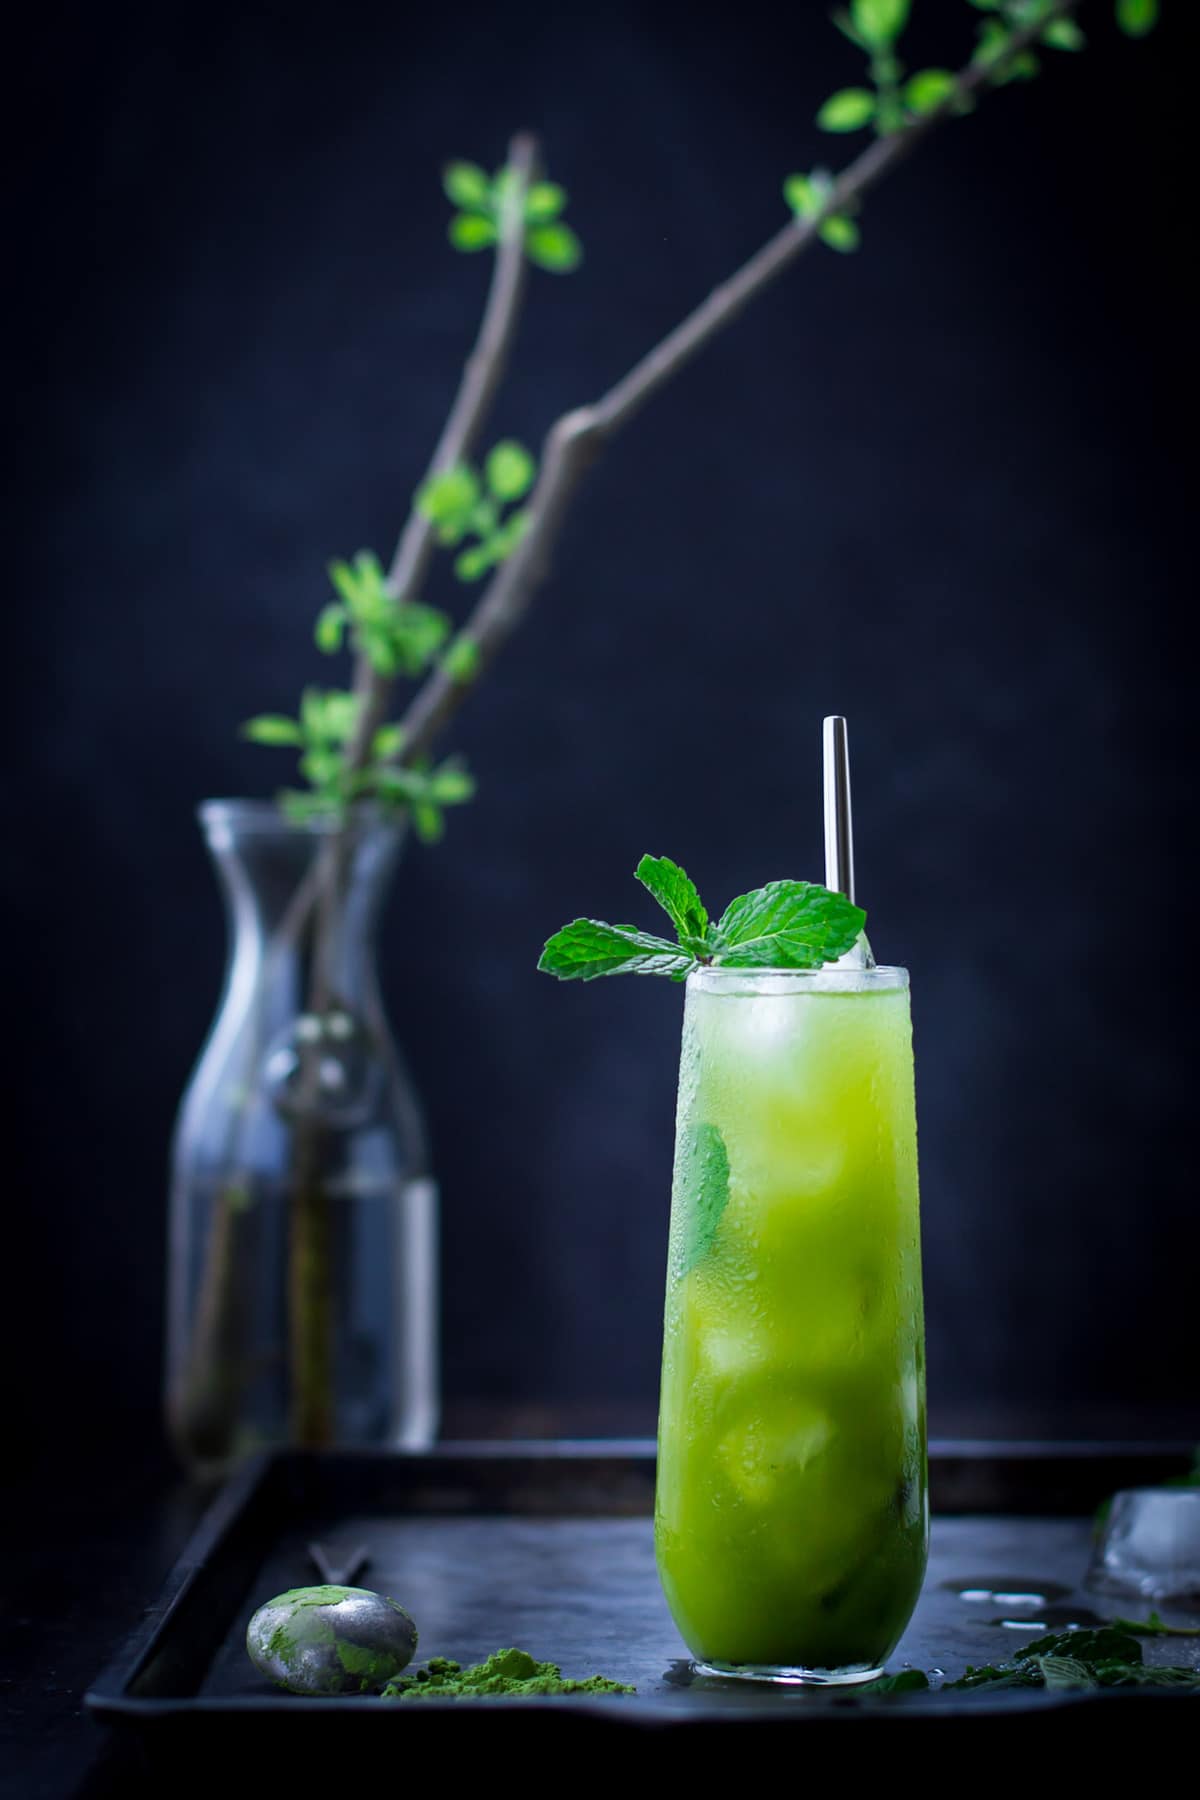 A bright green mint julep matcha cocktail in a highball glass with a green plant in the background